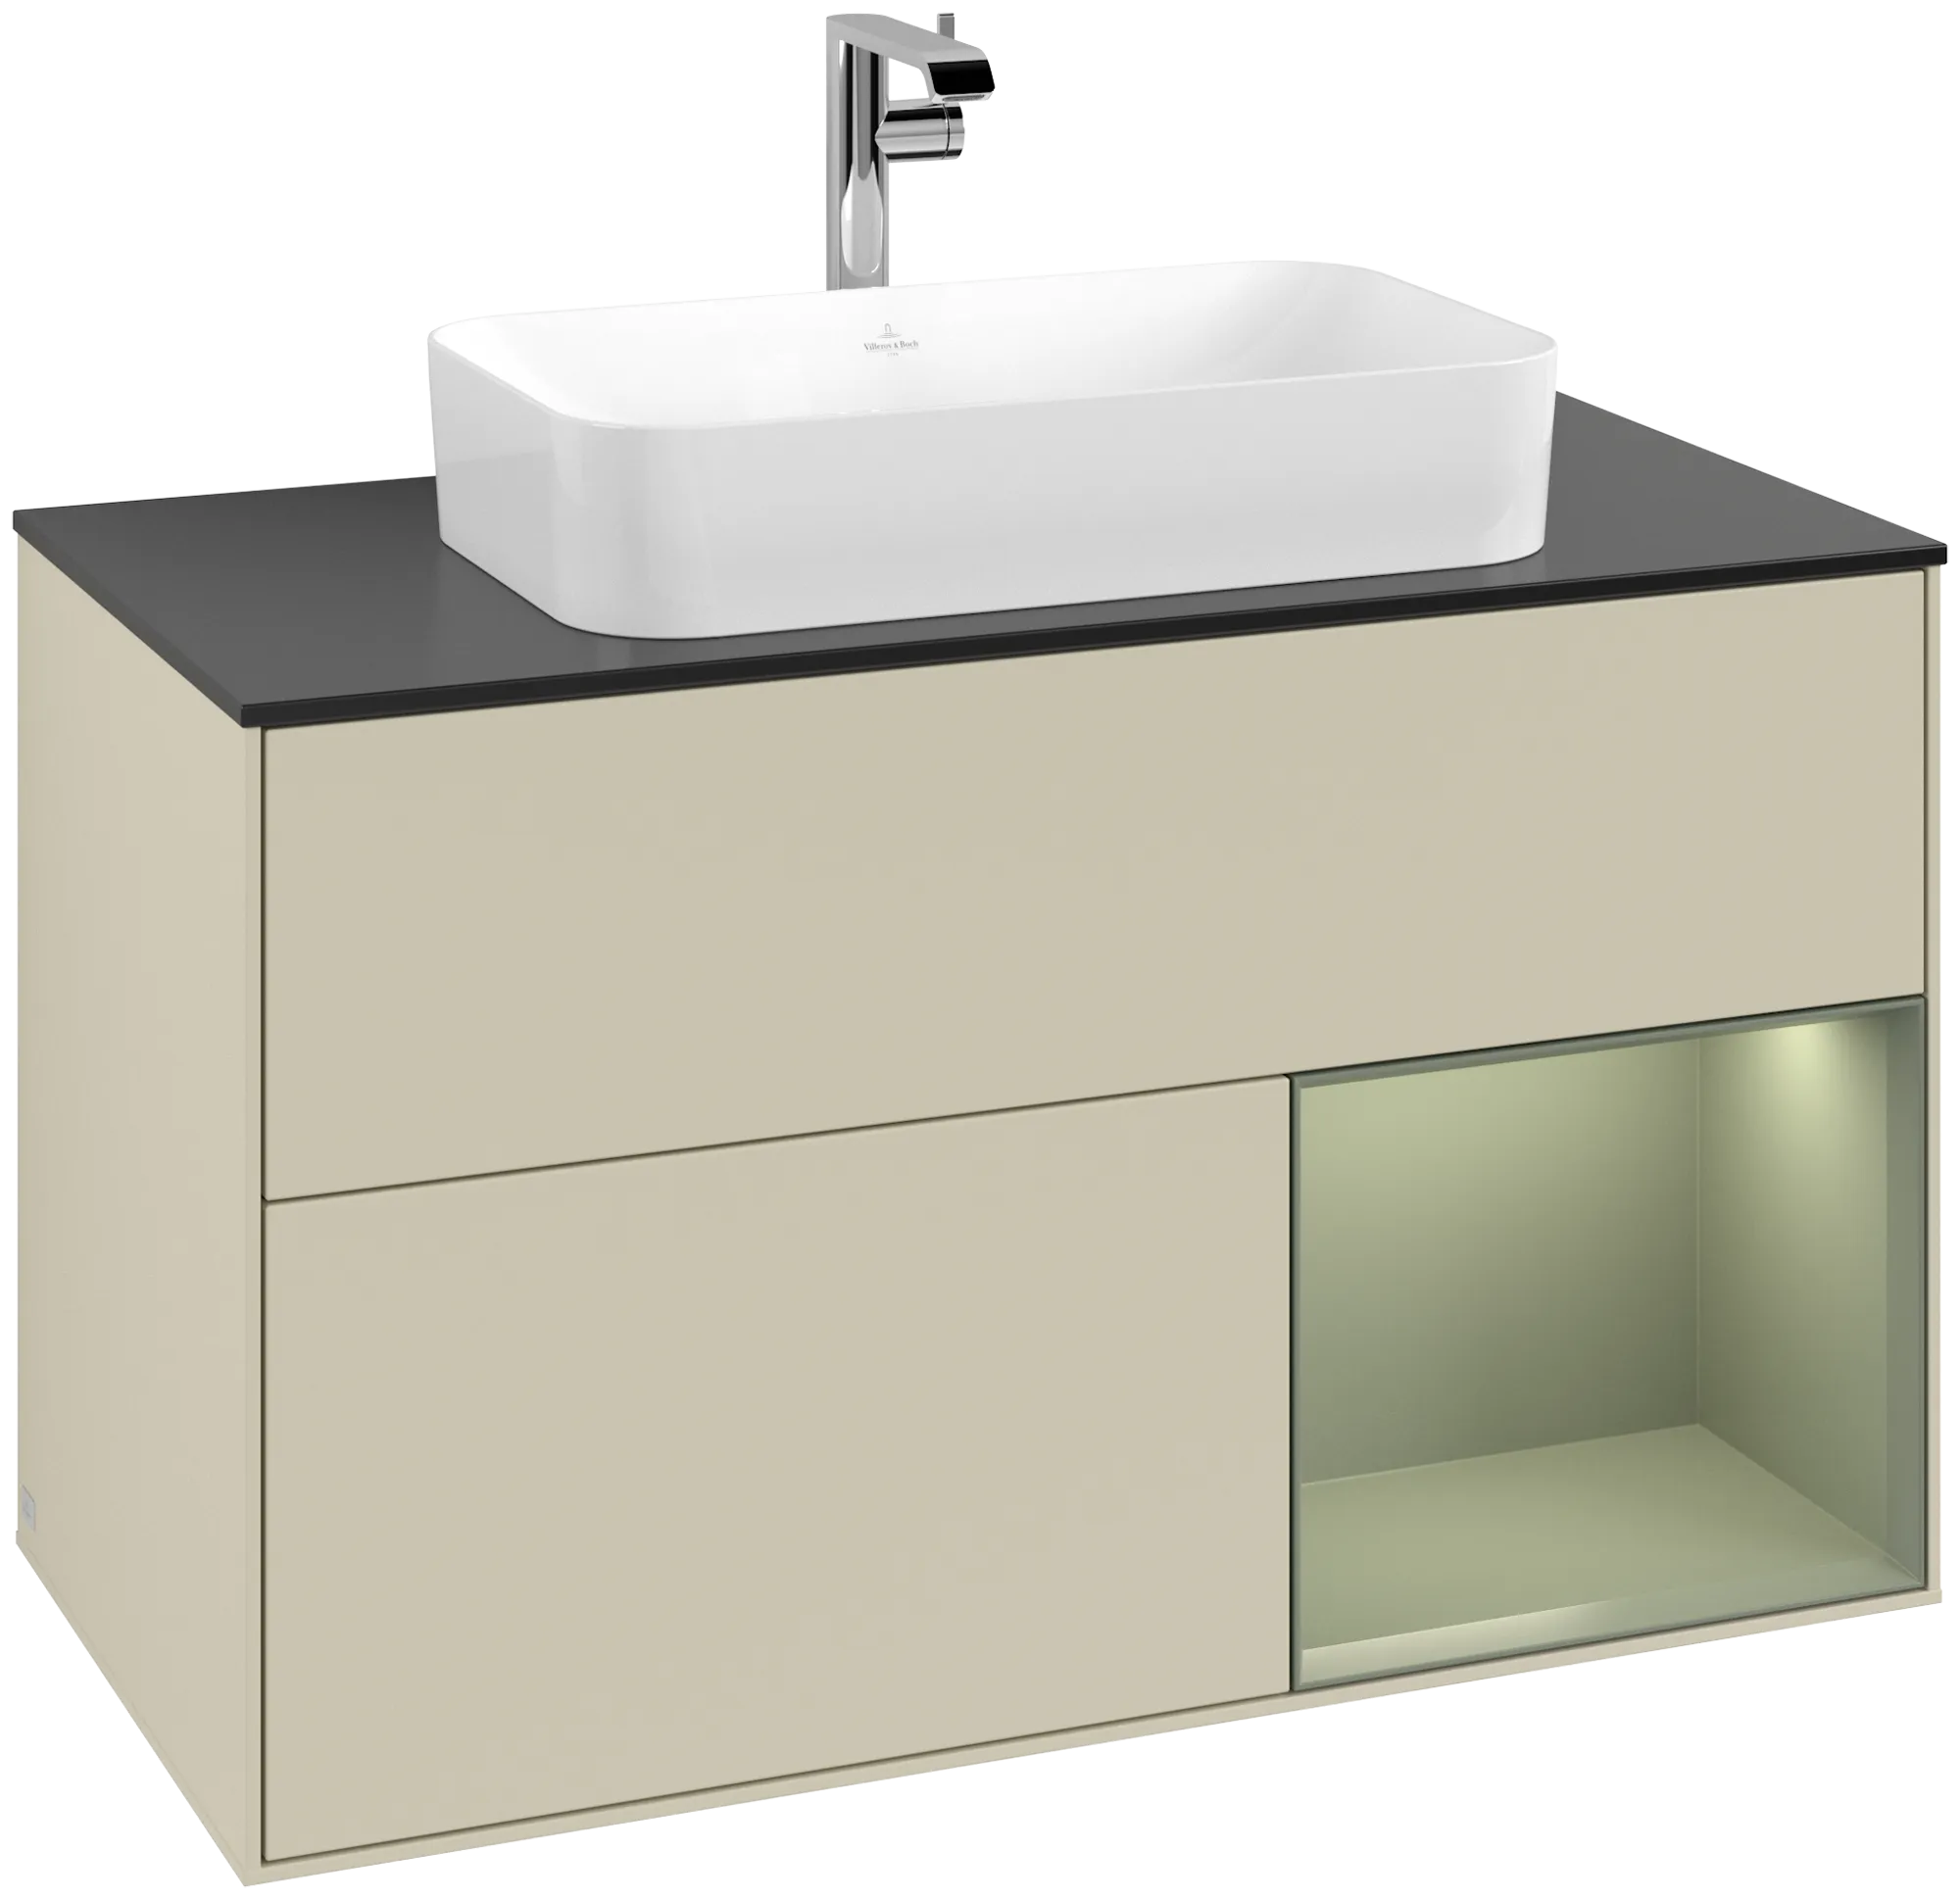 Picture of VILLEROY BOCH Finion Vanity unit, with lighting, 2 pull-out compartments, 1000 x 603 x 501 mm, Silk Grey Matt Lacquer / Olive Matt Lacquer / Glass Black Matt #G252GMHJ